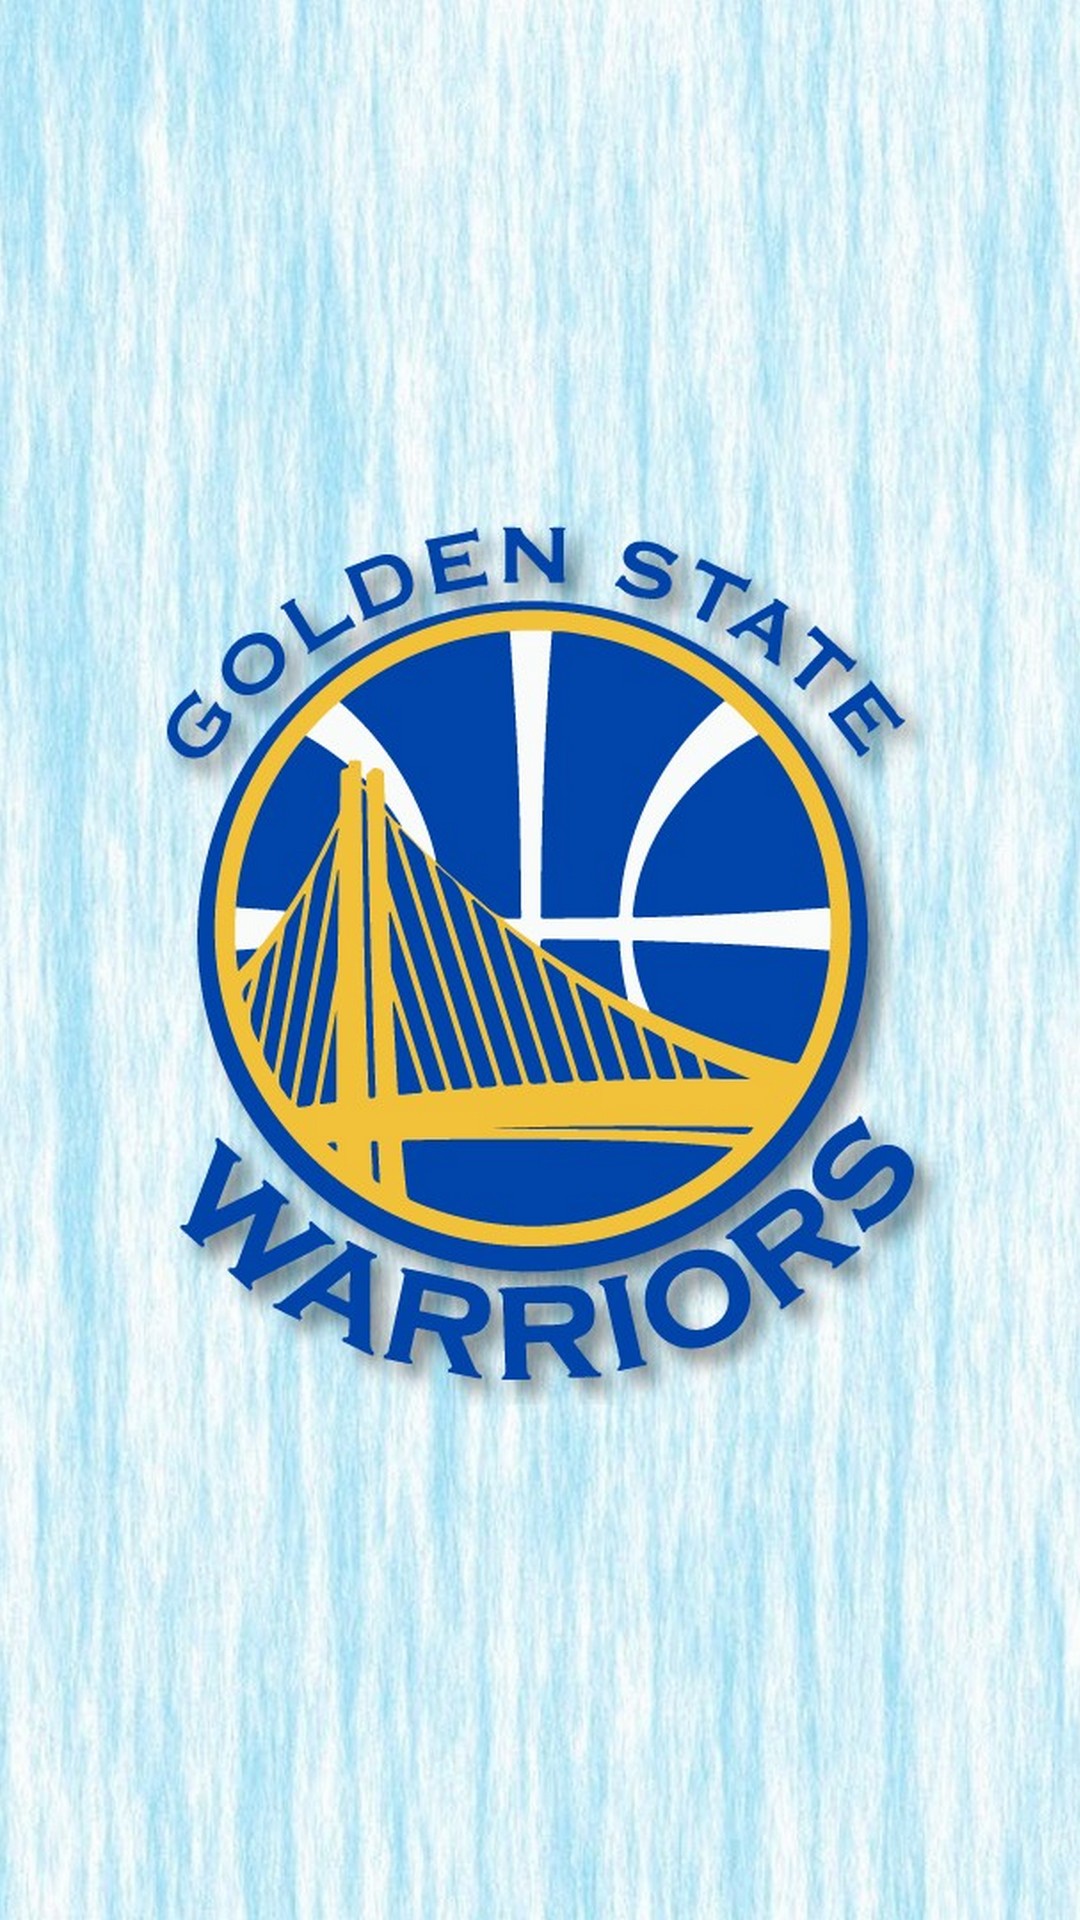 iPhone X Wallpaper Golden State Warriors with image resolution 1080x1920 pixel. You can make this wallpaper for your iPhone 5, 6, 7, 8, X backgrounds, Mobile Screensaver, or iPad Lock Screen